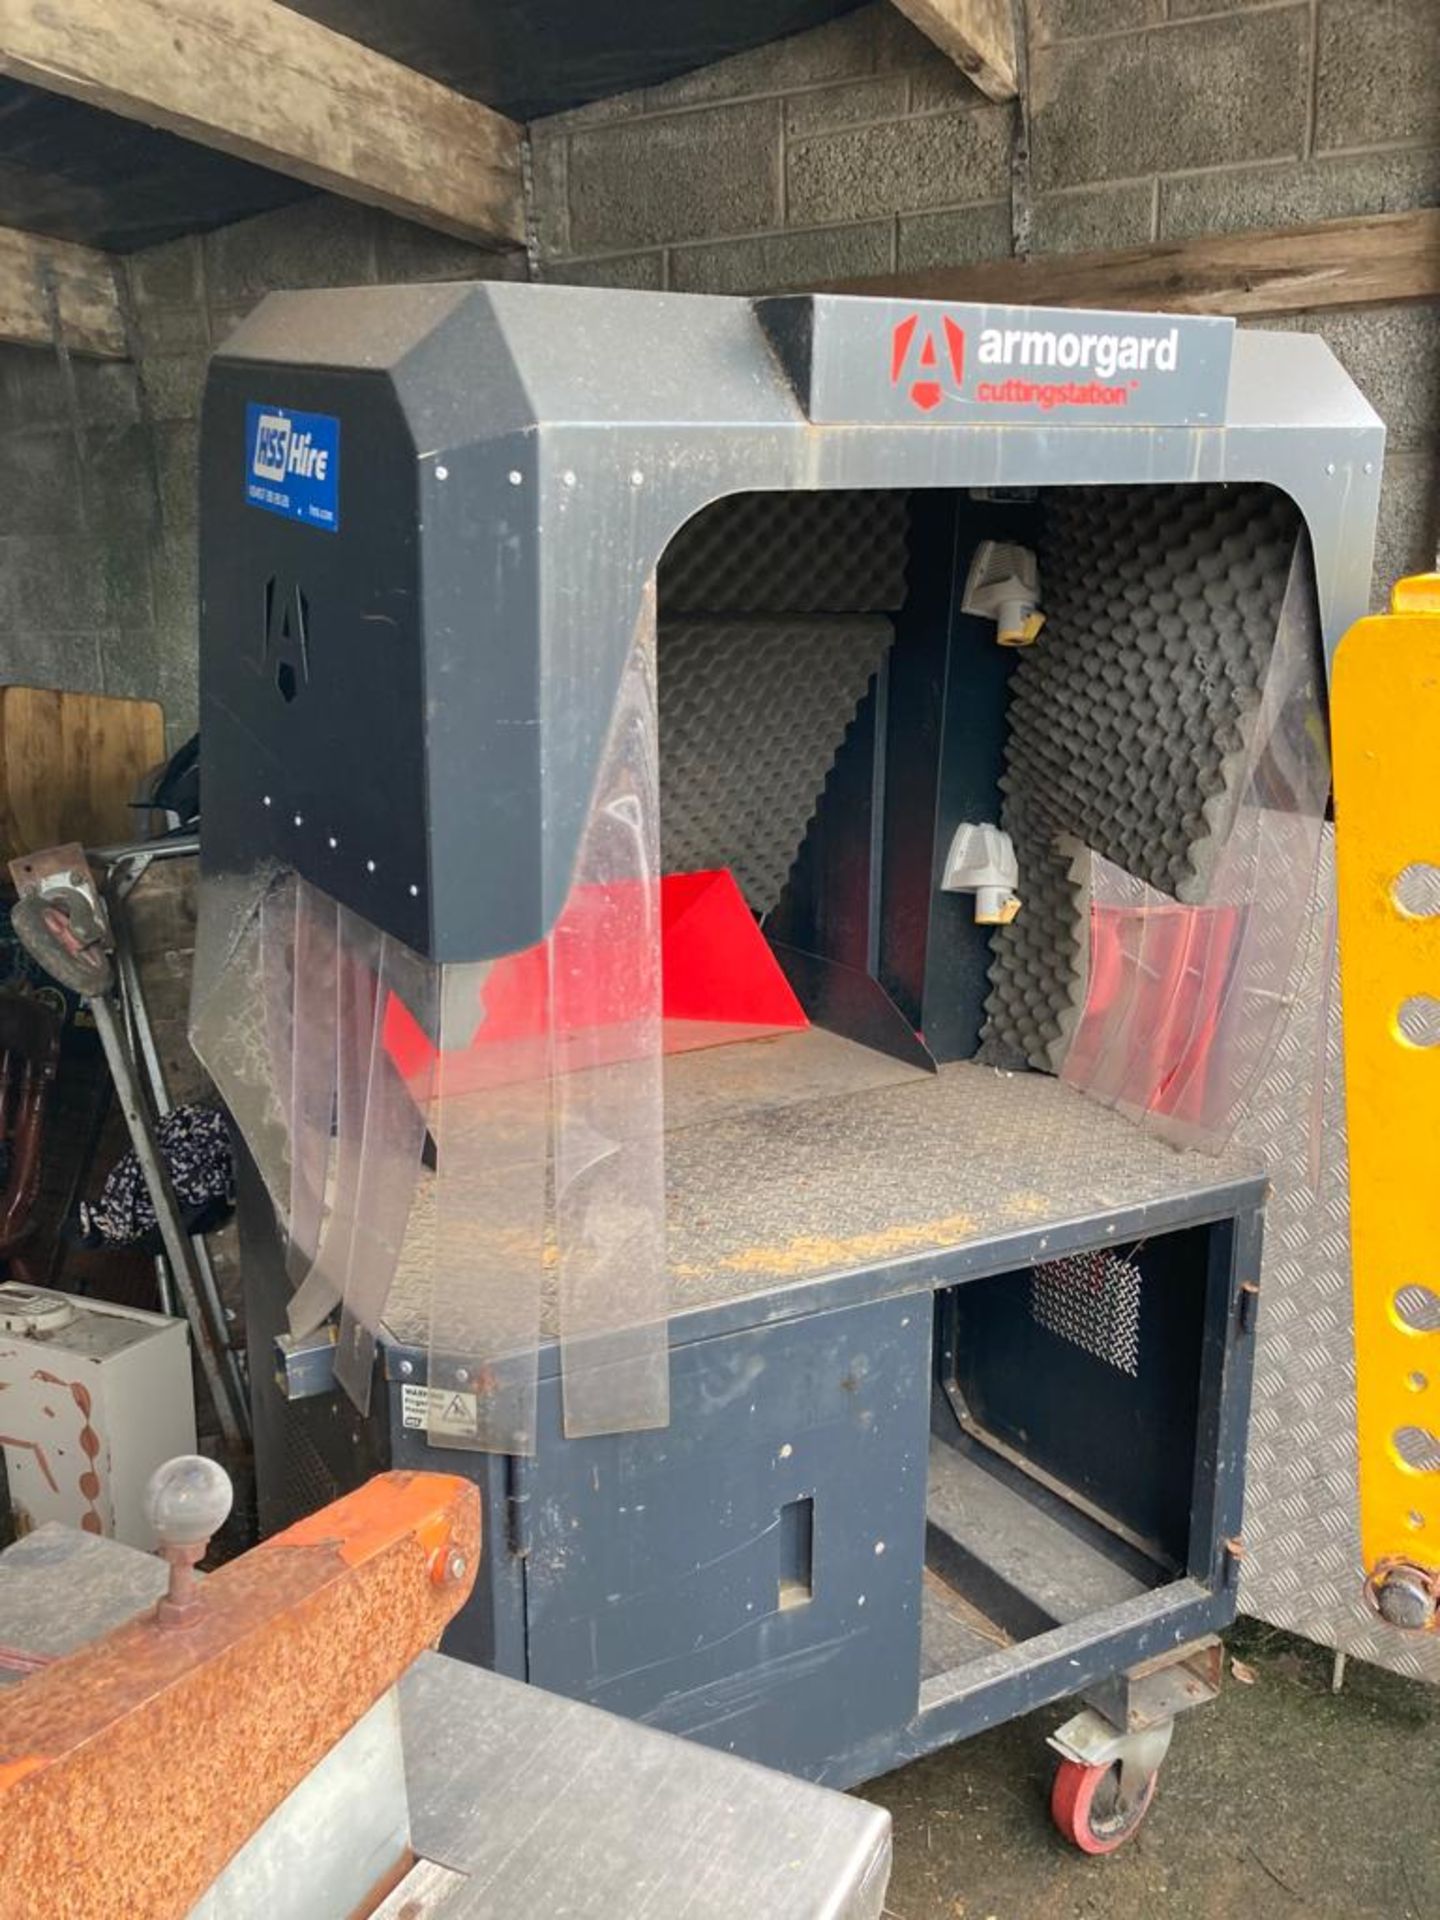 ARMAGUARD CUTTING STATION WELDING BOOTH LOCATION NORTHERN IRELAND.